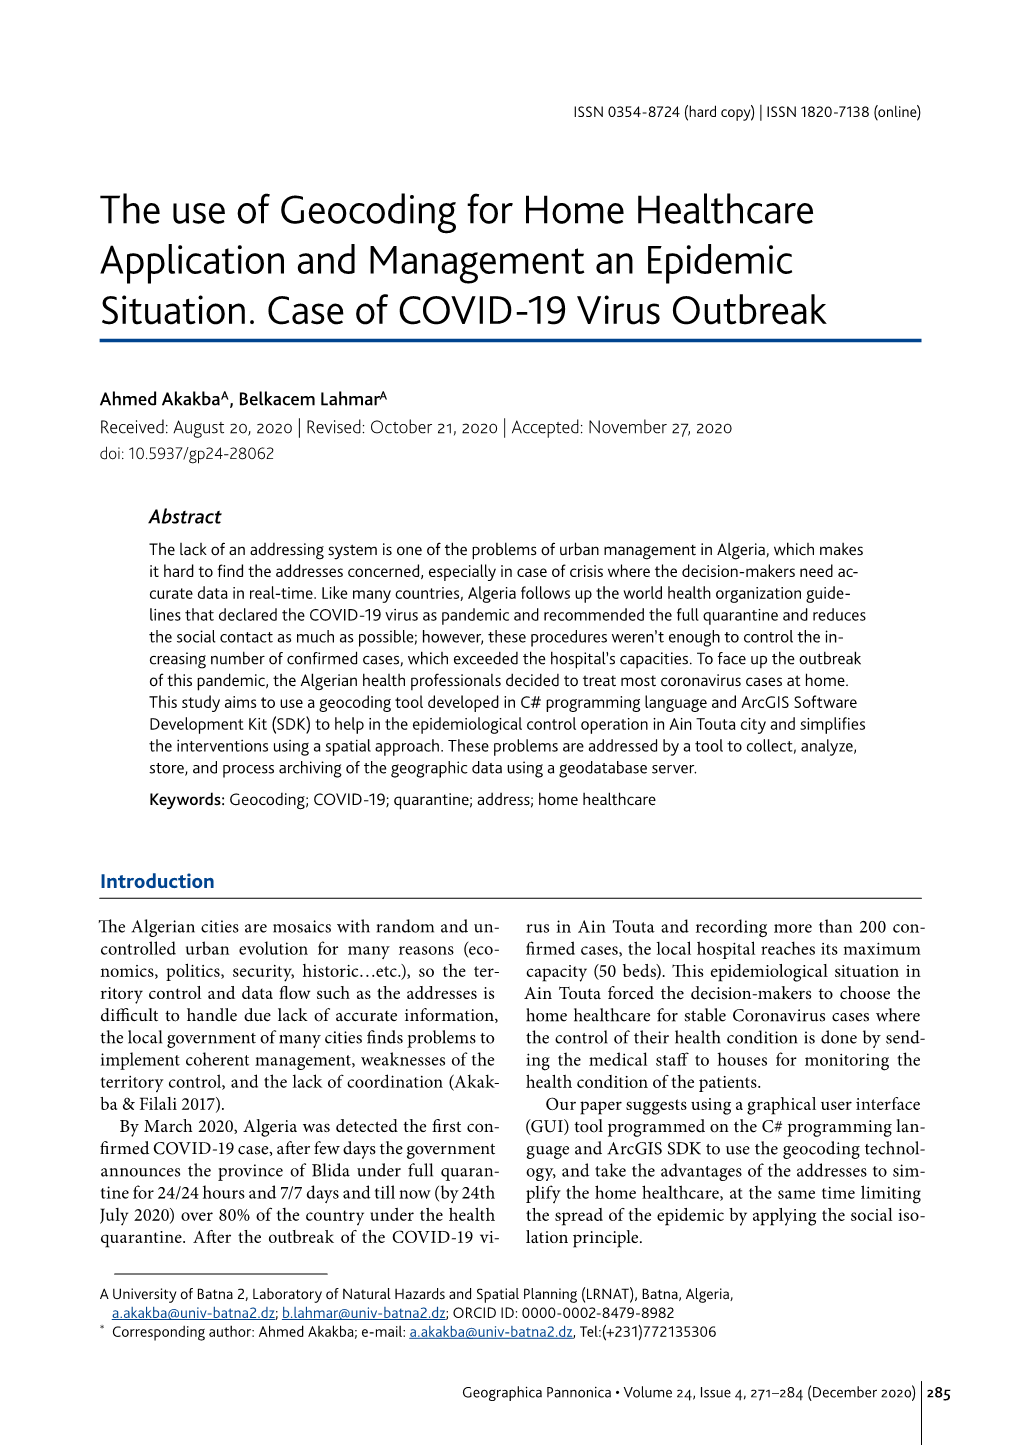 The Use of Geocoding for Home Healthcare Application and Management an Epidemic Situation